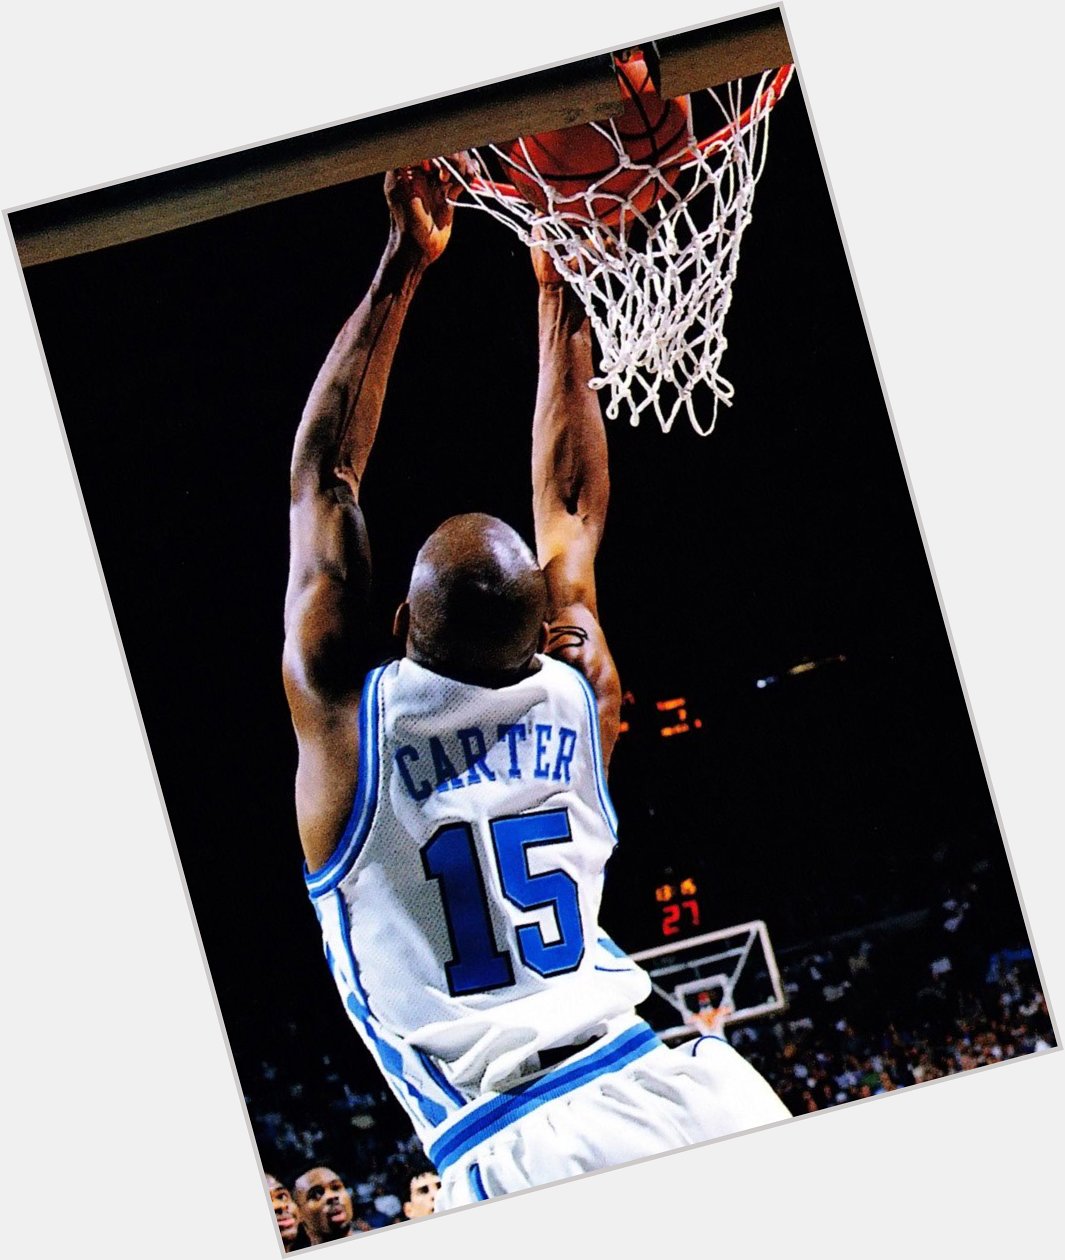 Happy birthday to Vince Carter! One of the greatest Tar Heels and NBA players of all-time! 